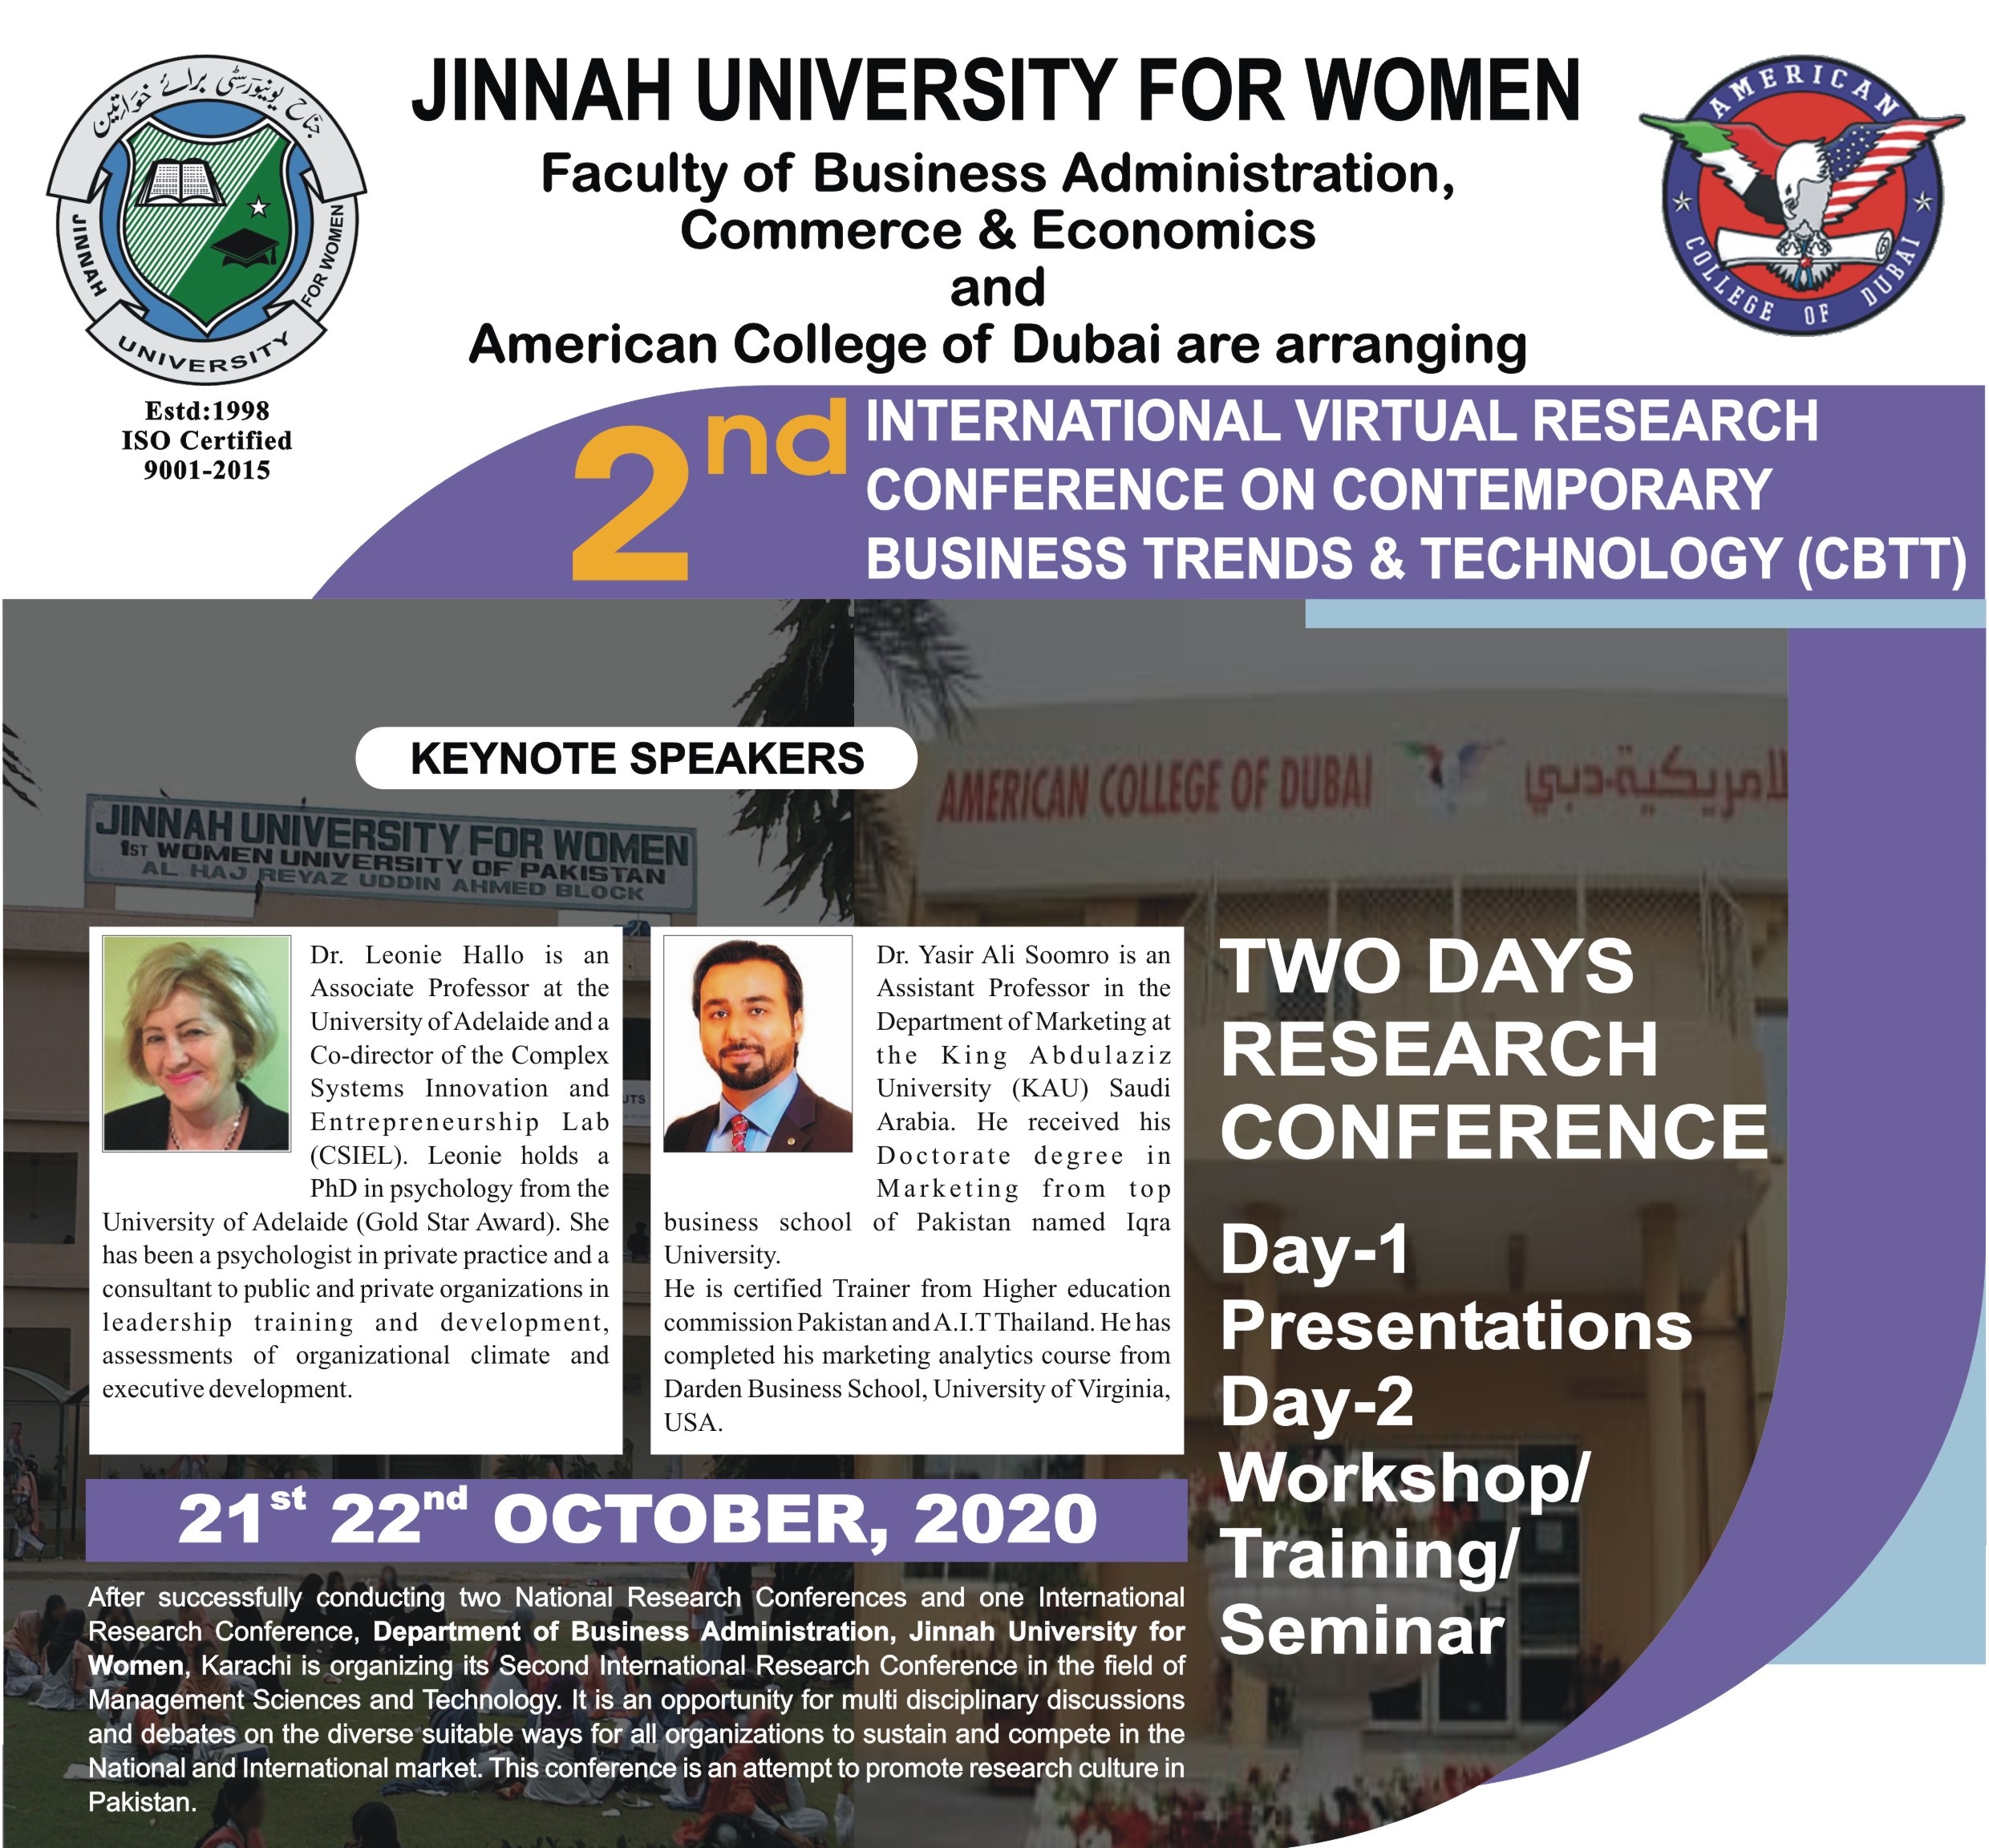 2nd International Virtual Research Conference on Contemporary Business Trends and Technology